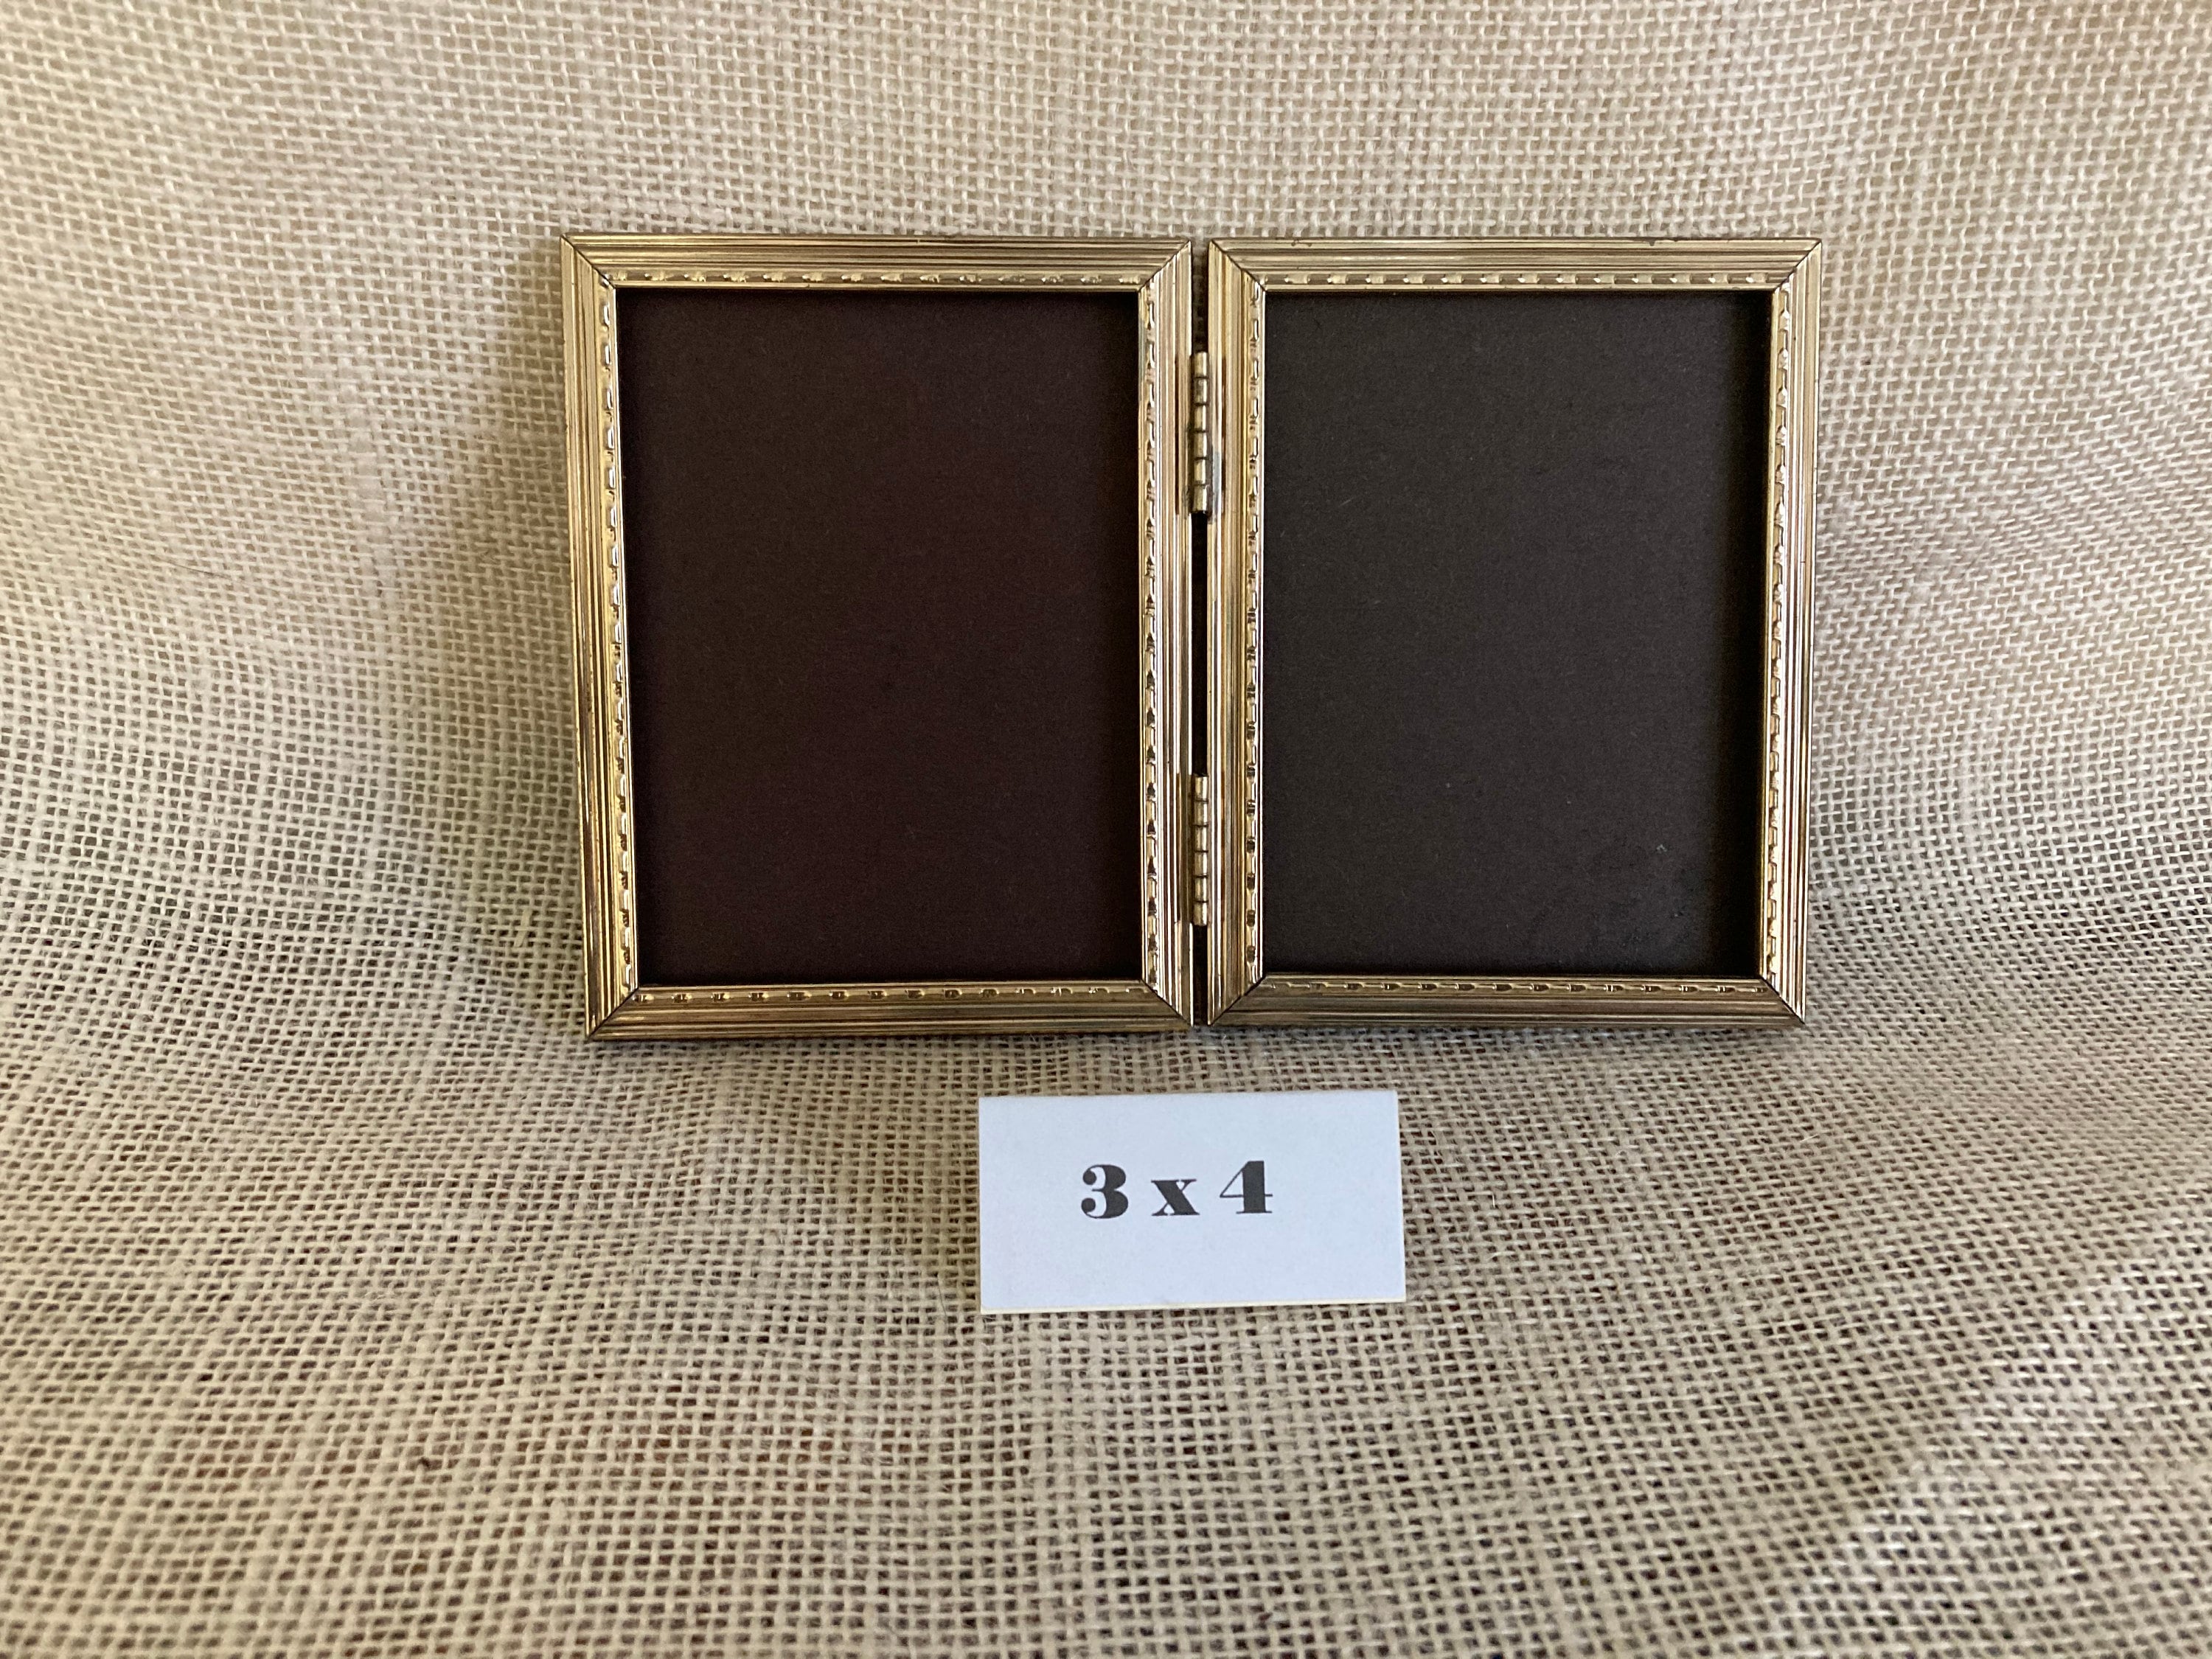 3 x 4 Photos 3x4 Frame Gold Tone Metal w/ Glass Vintage Hinged Double Picture Frame